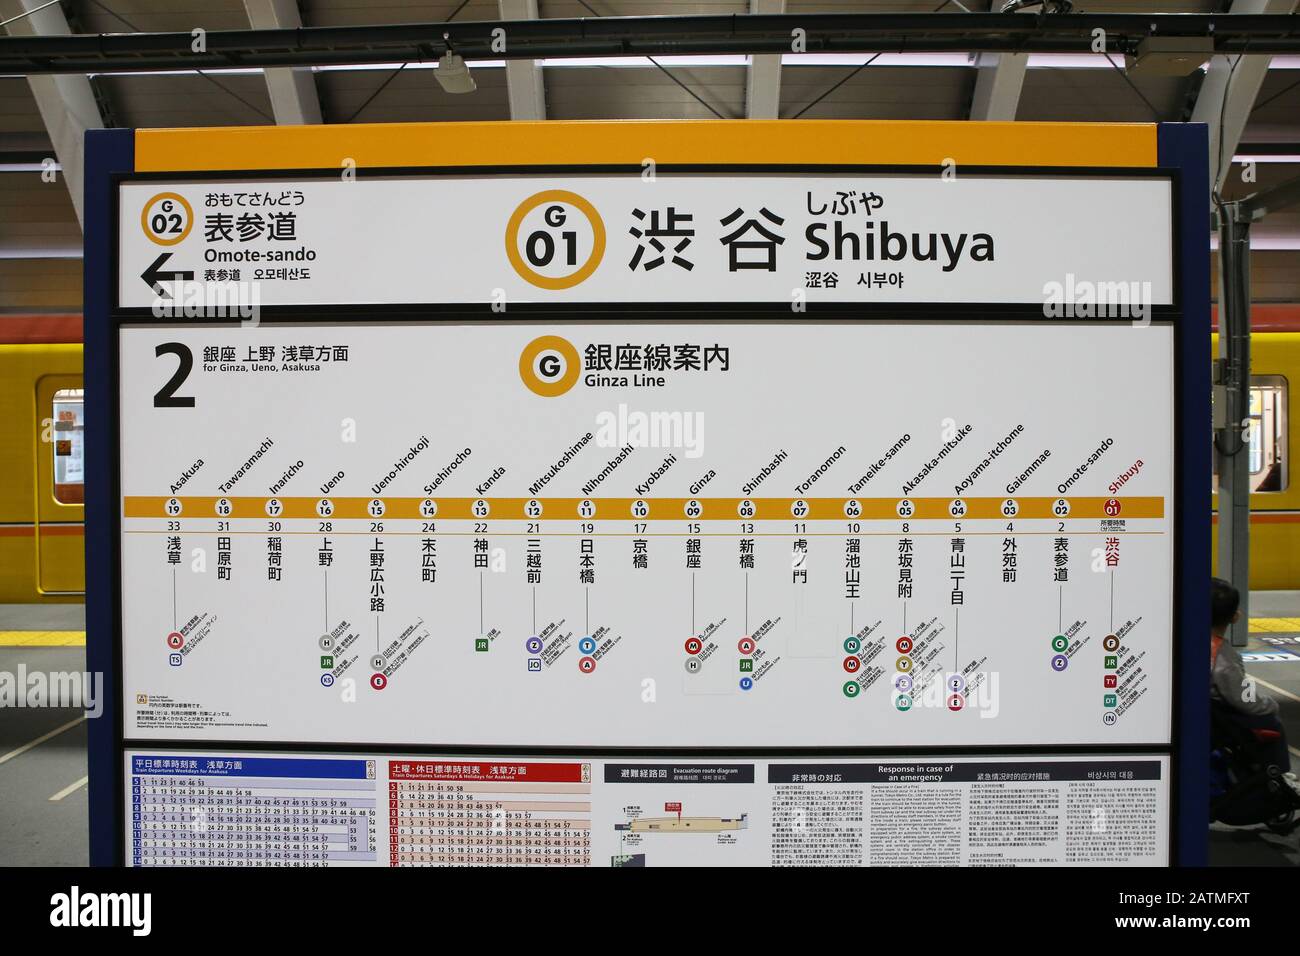 A General View Of The New Shibuya Station Of Tokyo Metro Ginza Line In Tokyo Japan On February 3 Credit Aflo Alamy Live News Stock Photo Alamy